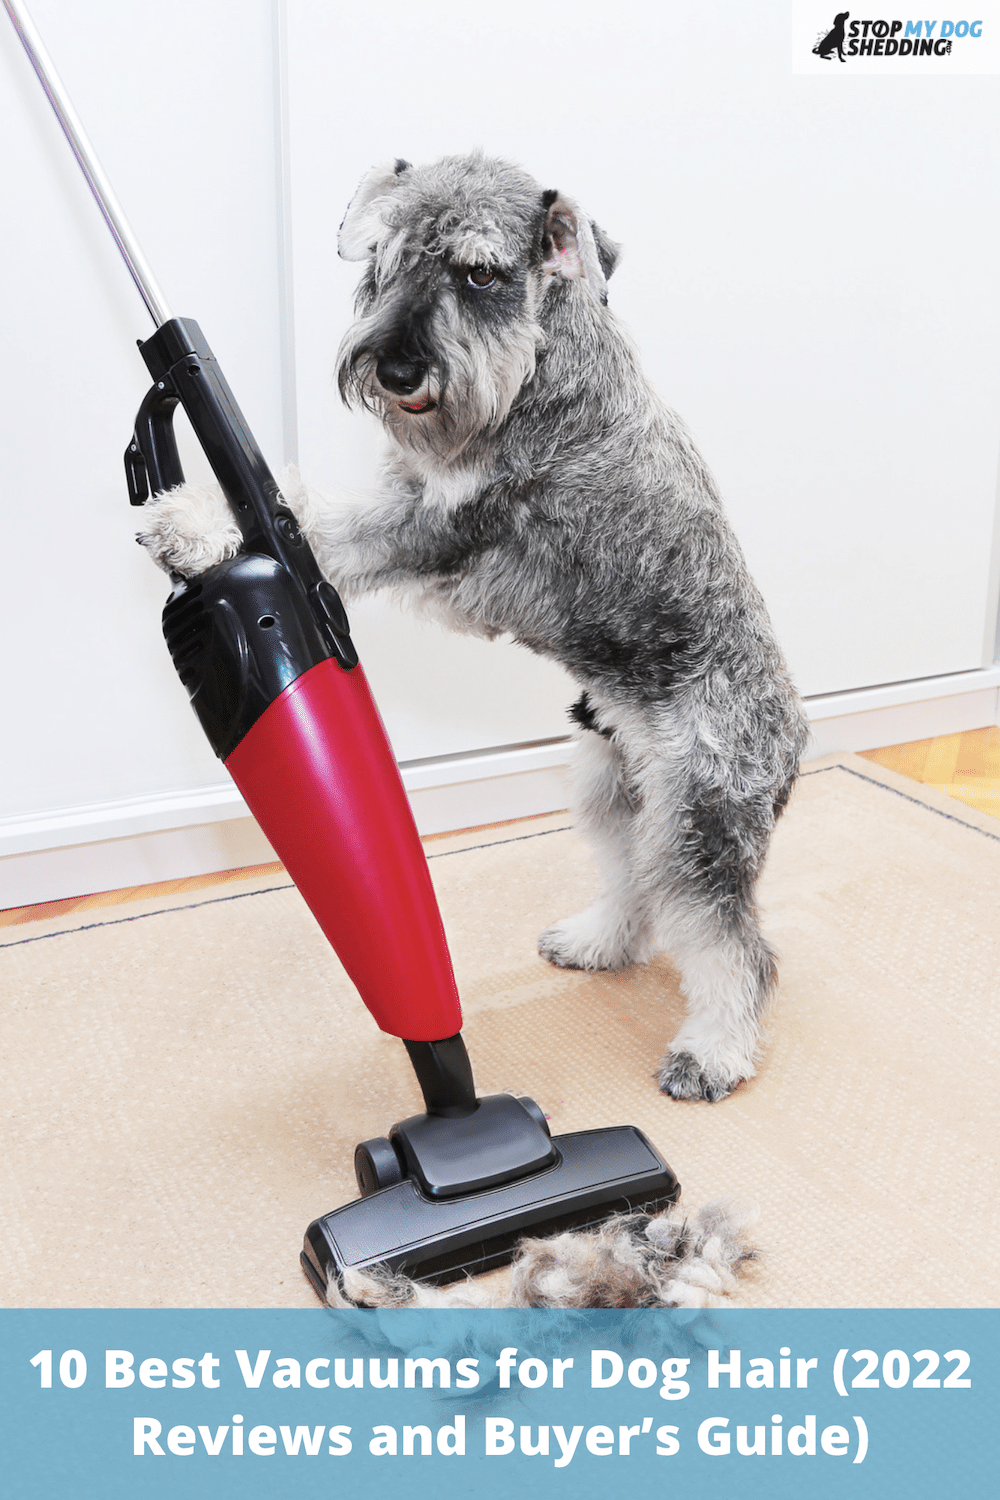 10 Best Vacuums for Dog Hair (2022 Reviews and Buyer’s Guide)